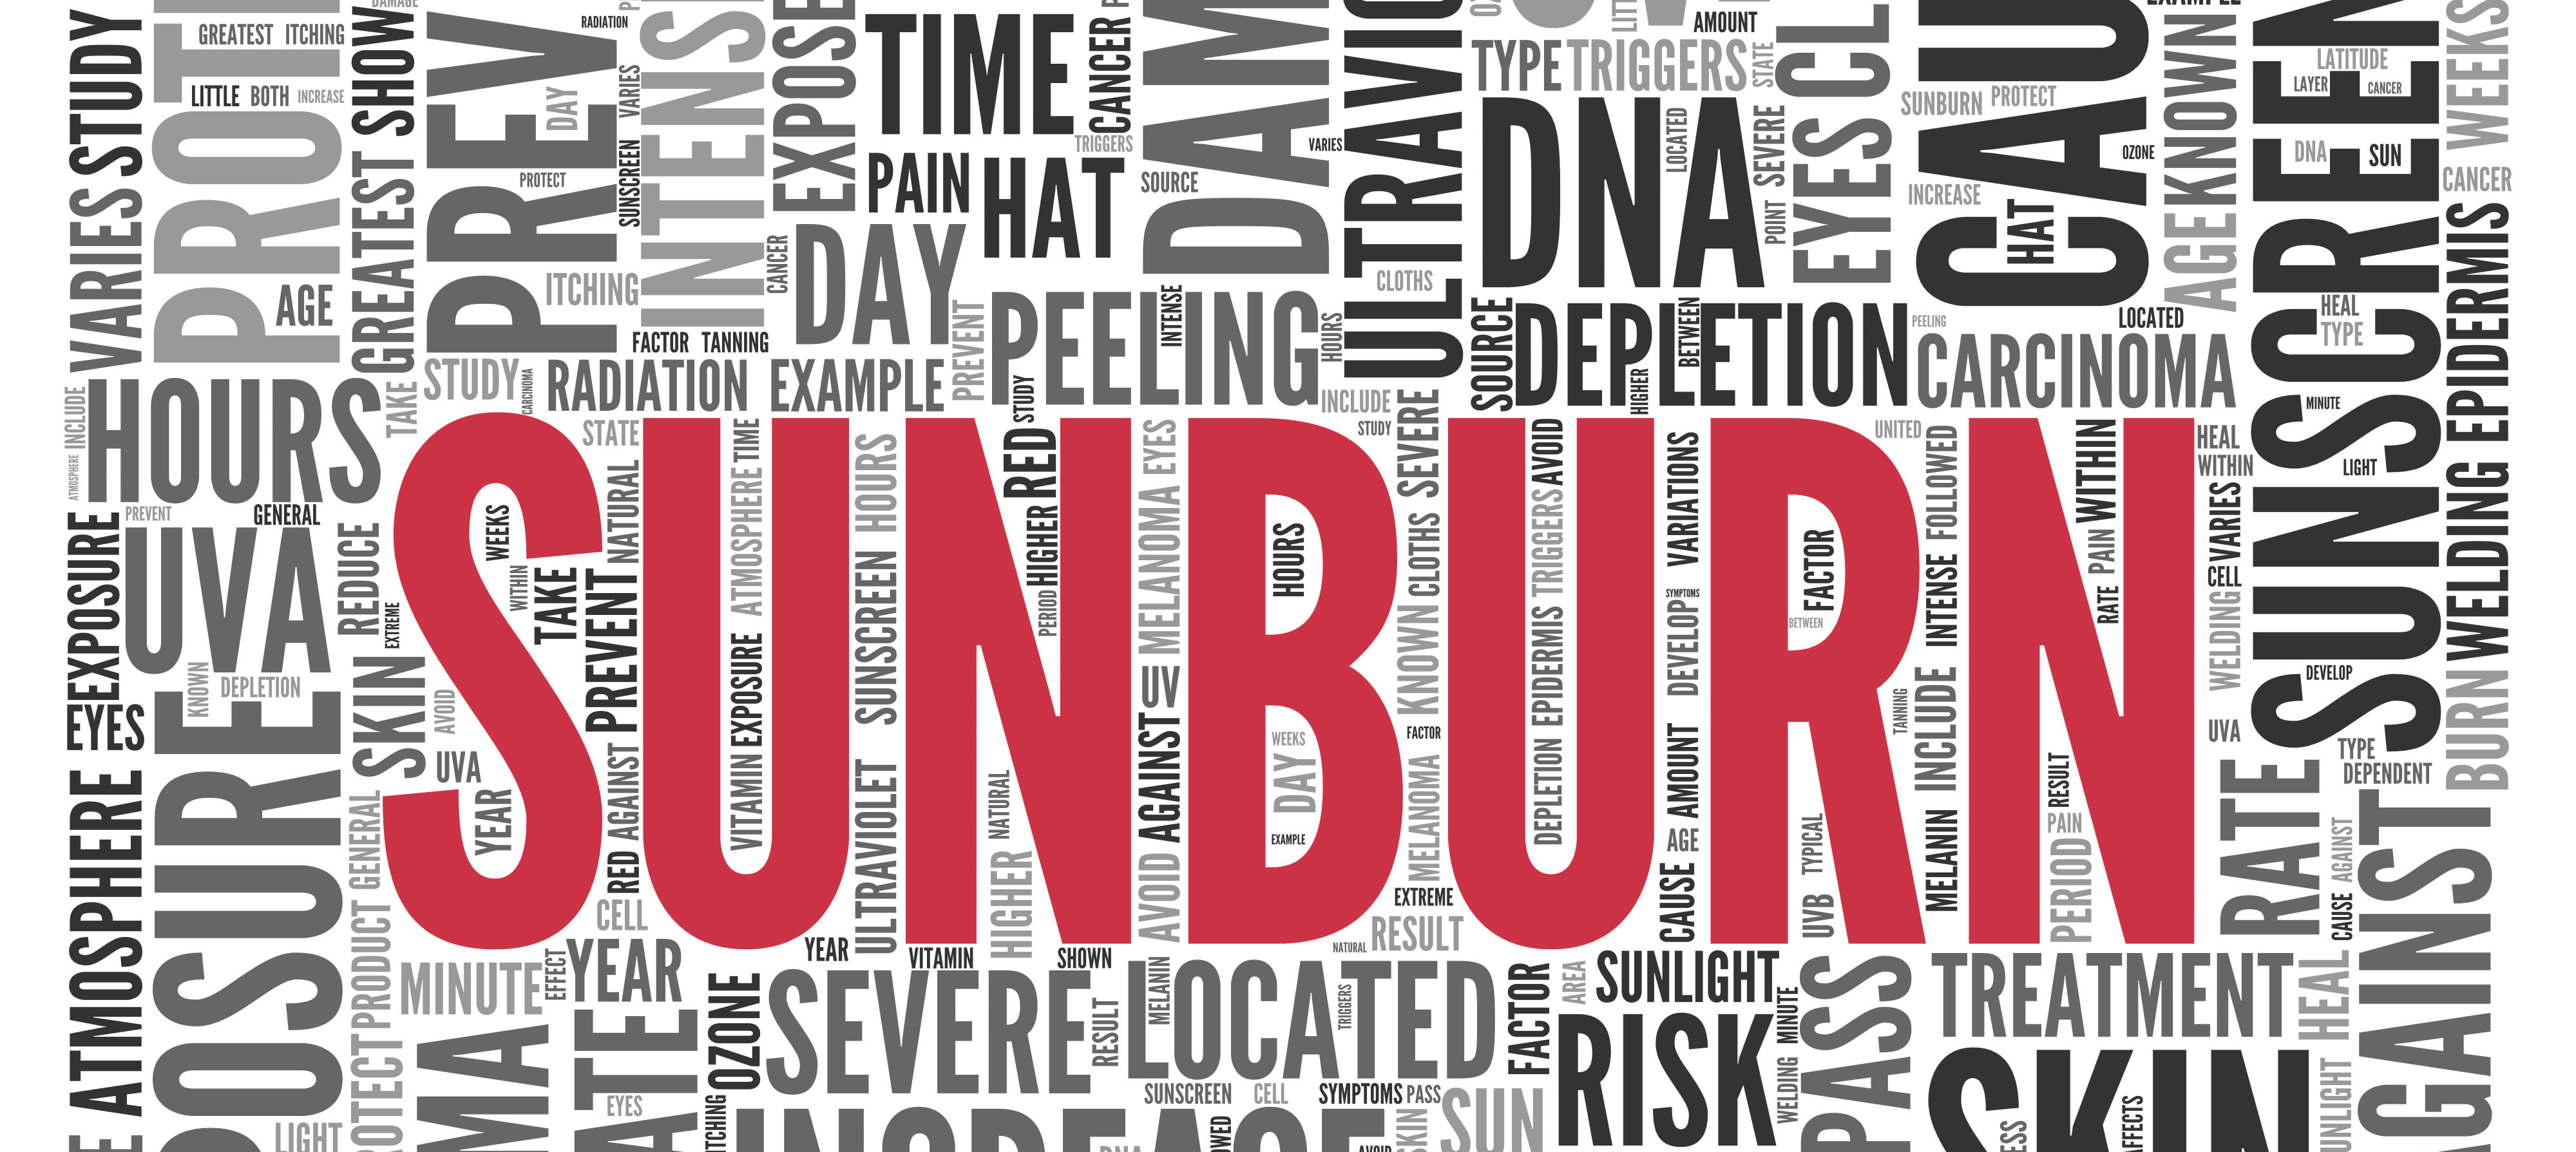 SUNBURN Concept in Word Tag Cloud Design, Close up Red SUNBURN Text at the Center of Word Tag Cloud on White Background.